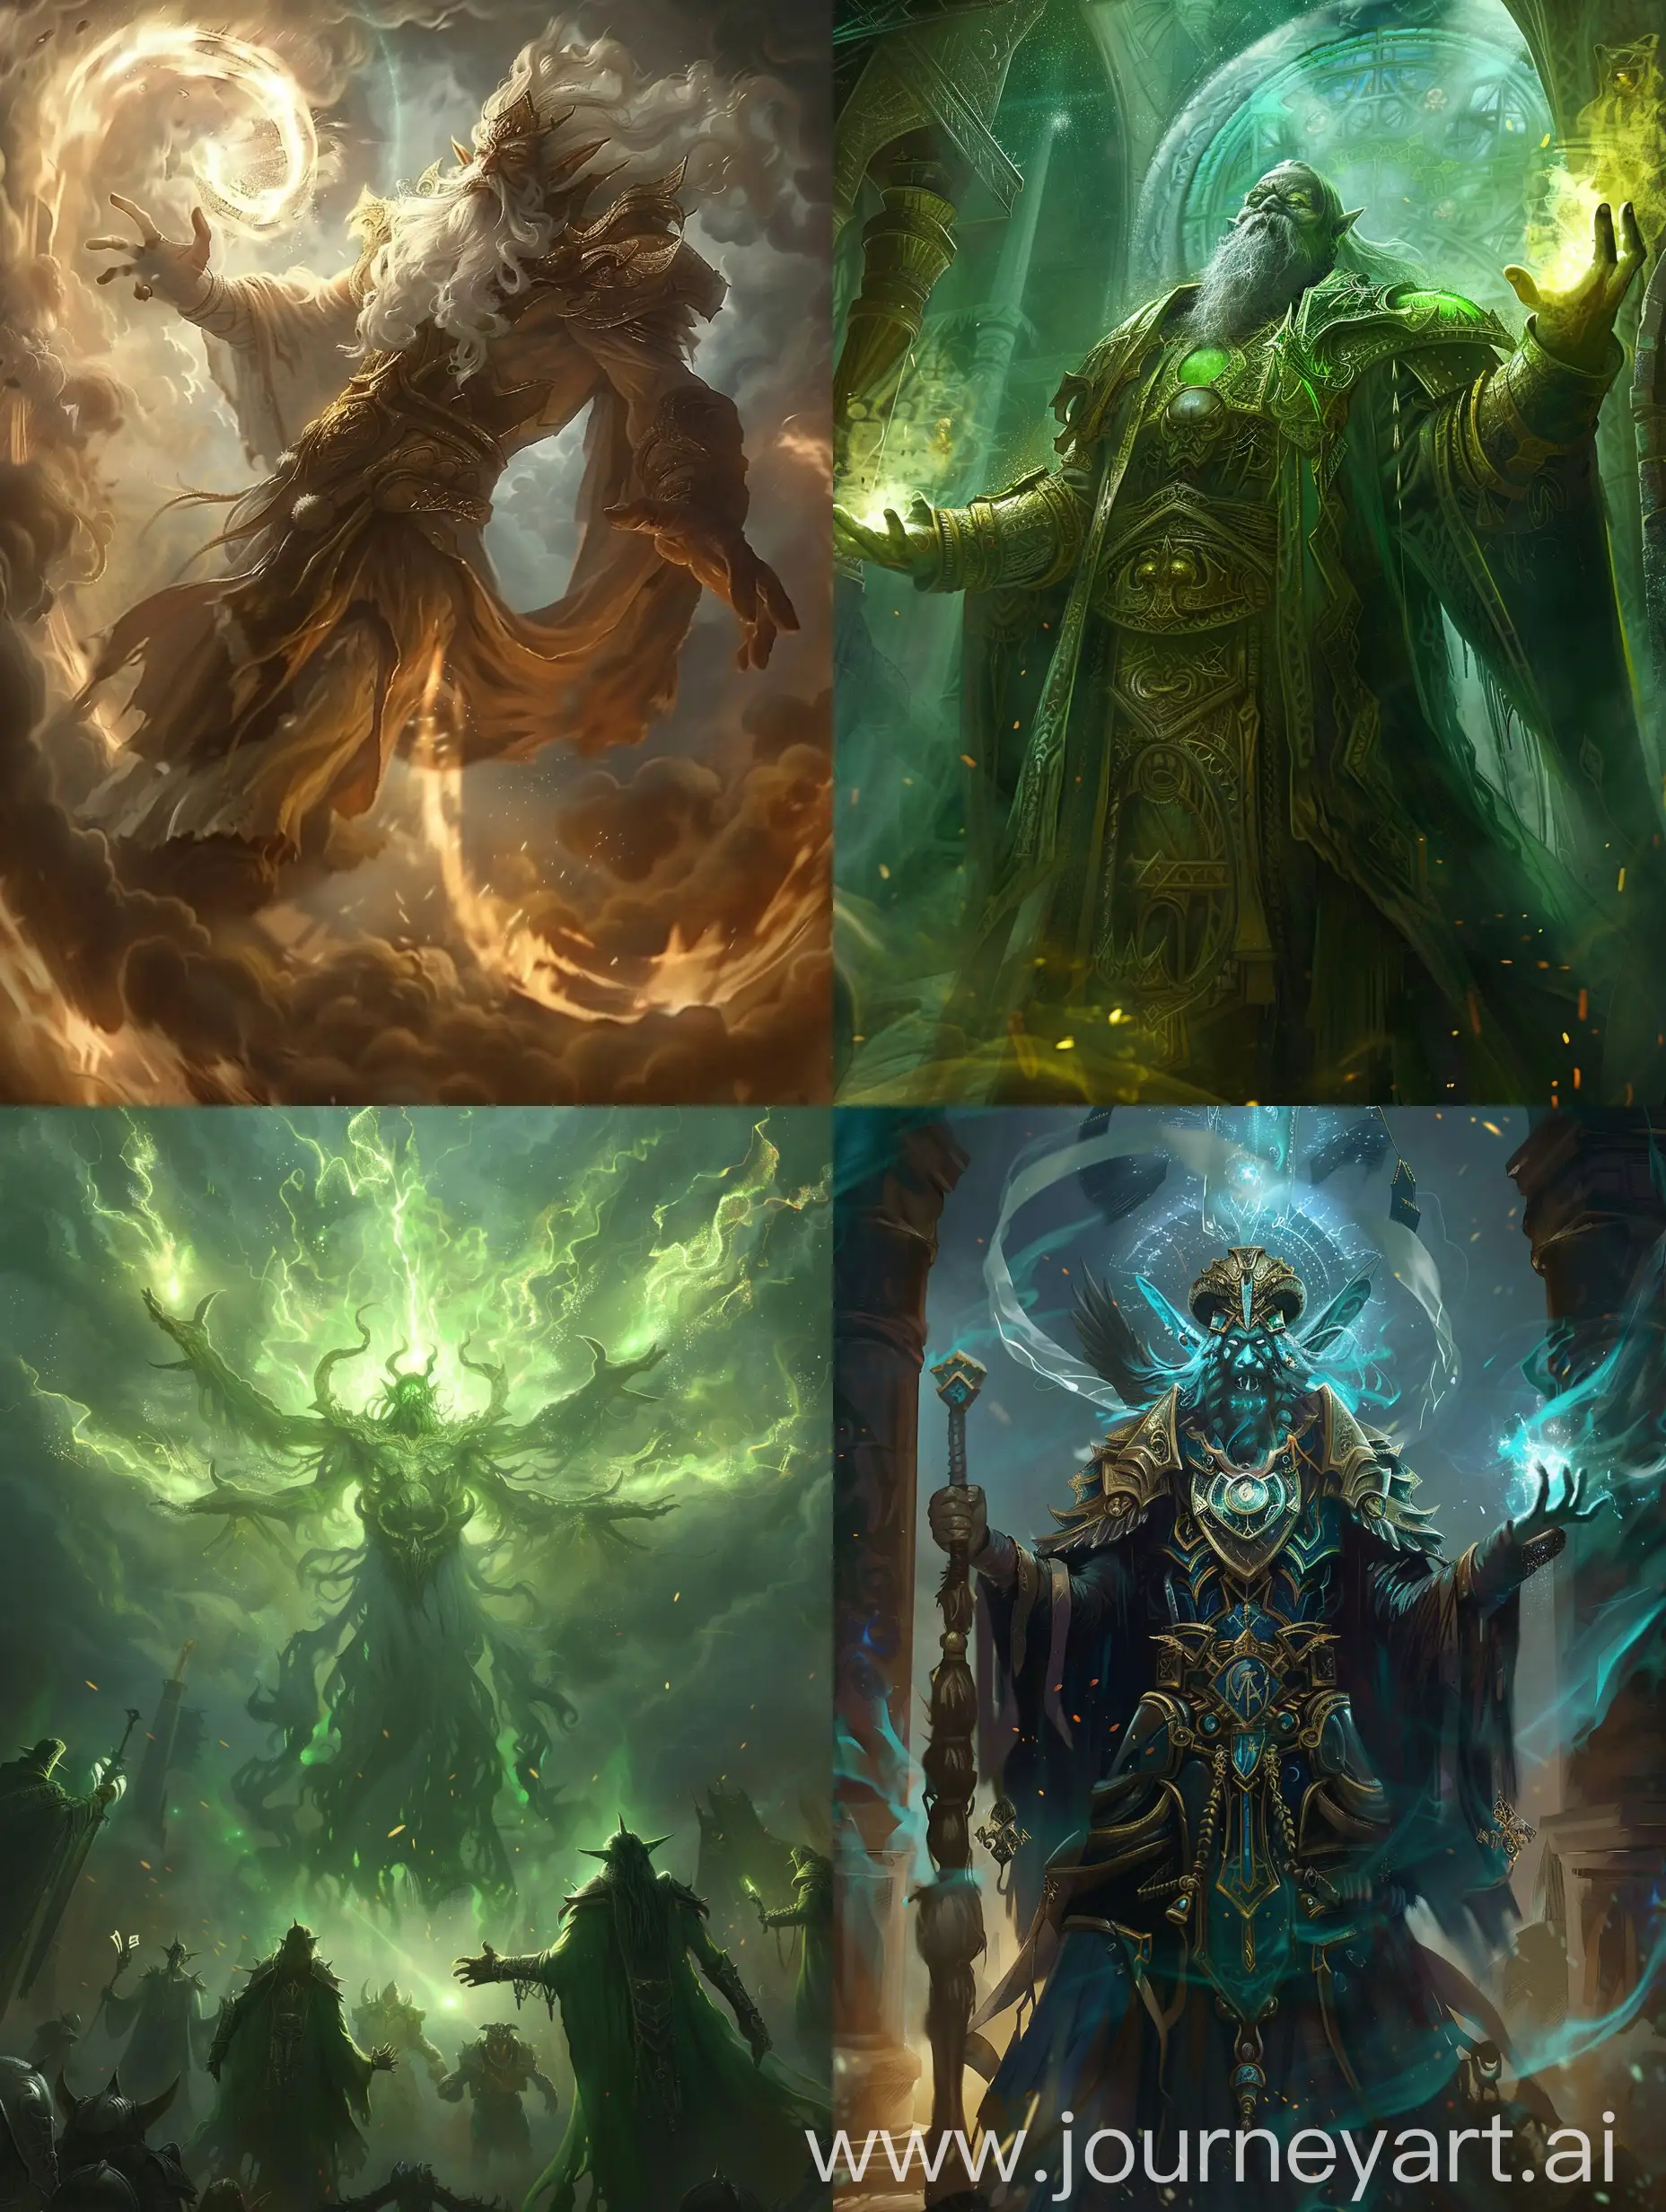 The Call of the forgotten gods, Gods, deity, curse, metaphysics, faith, in the style of world of warcraft